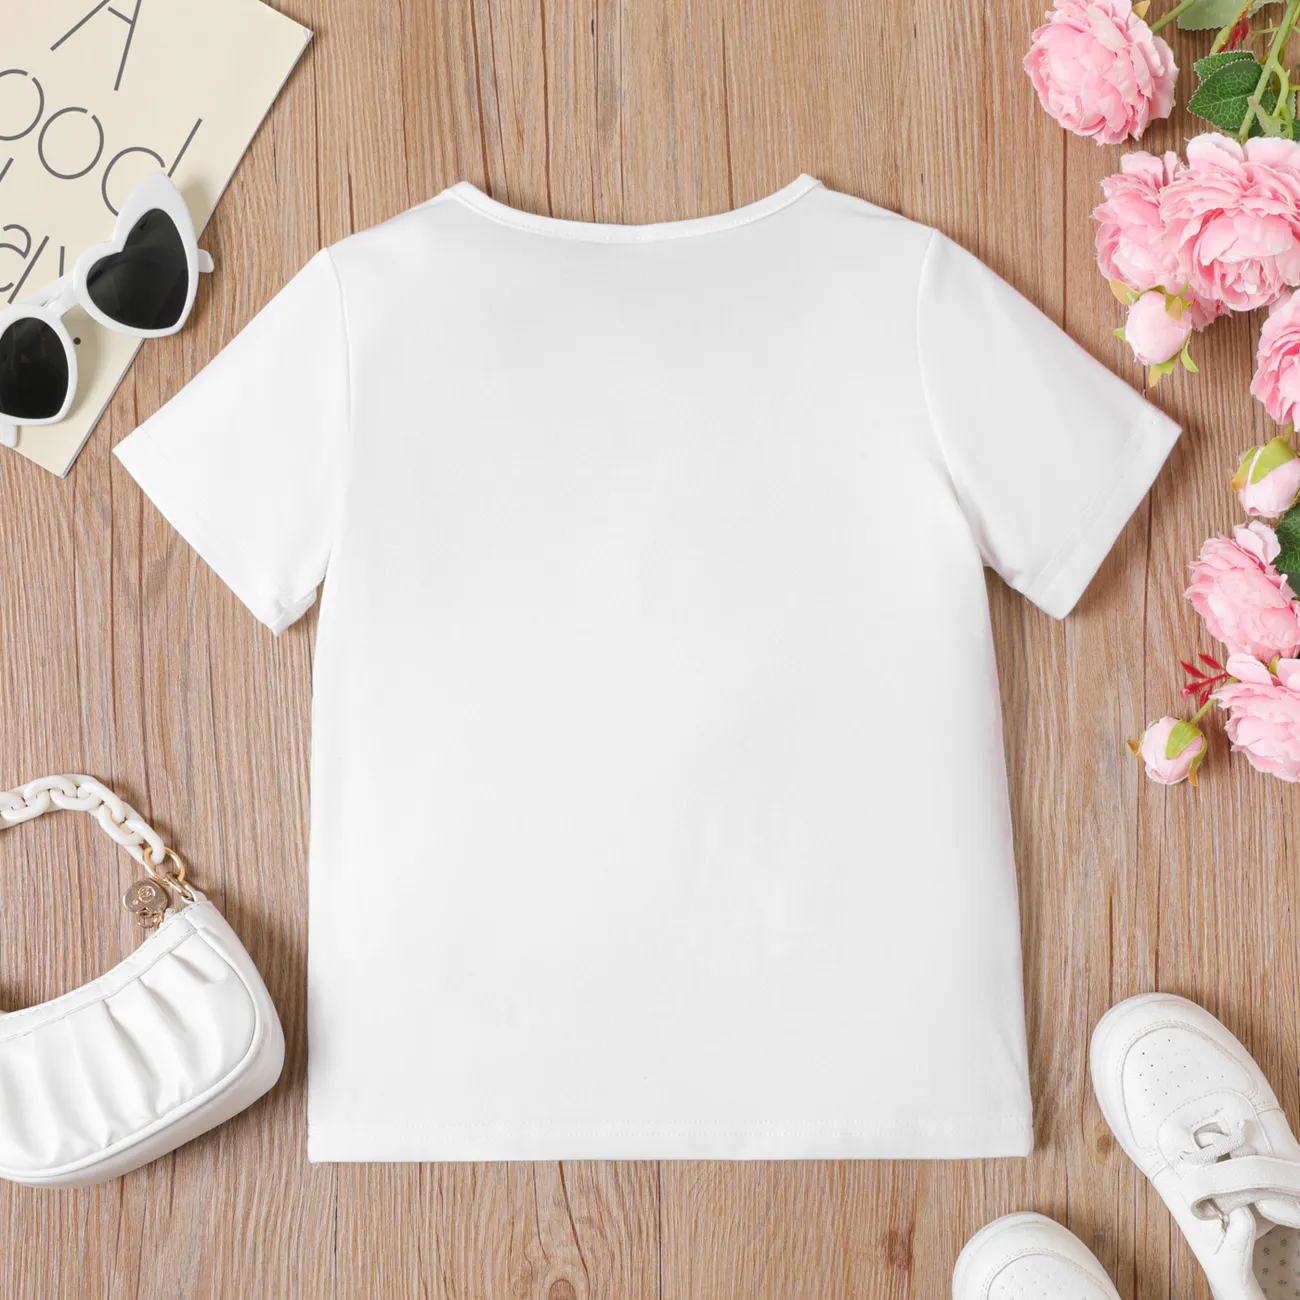 Kid Girl Heart/Butterfly Embroidered Short-sleeve Tee White big image 1